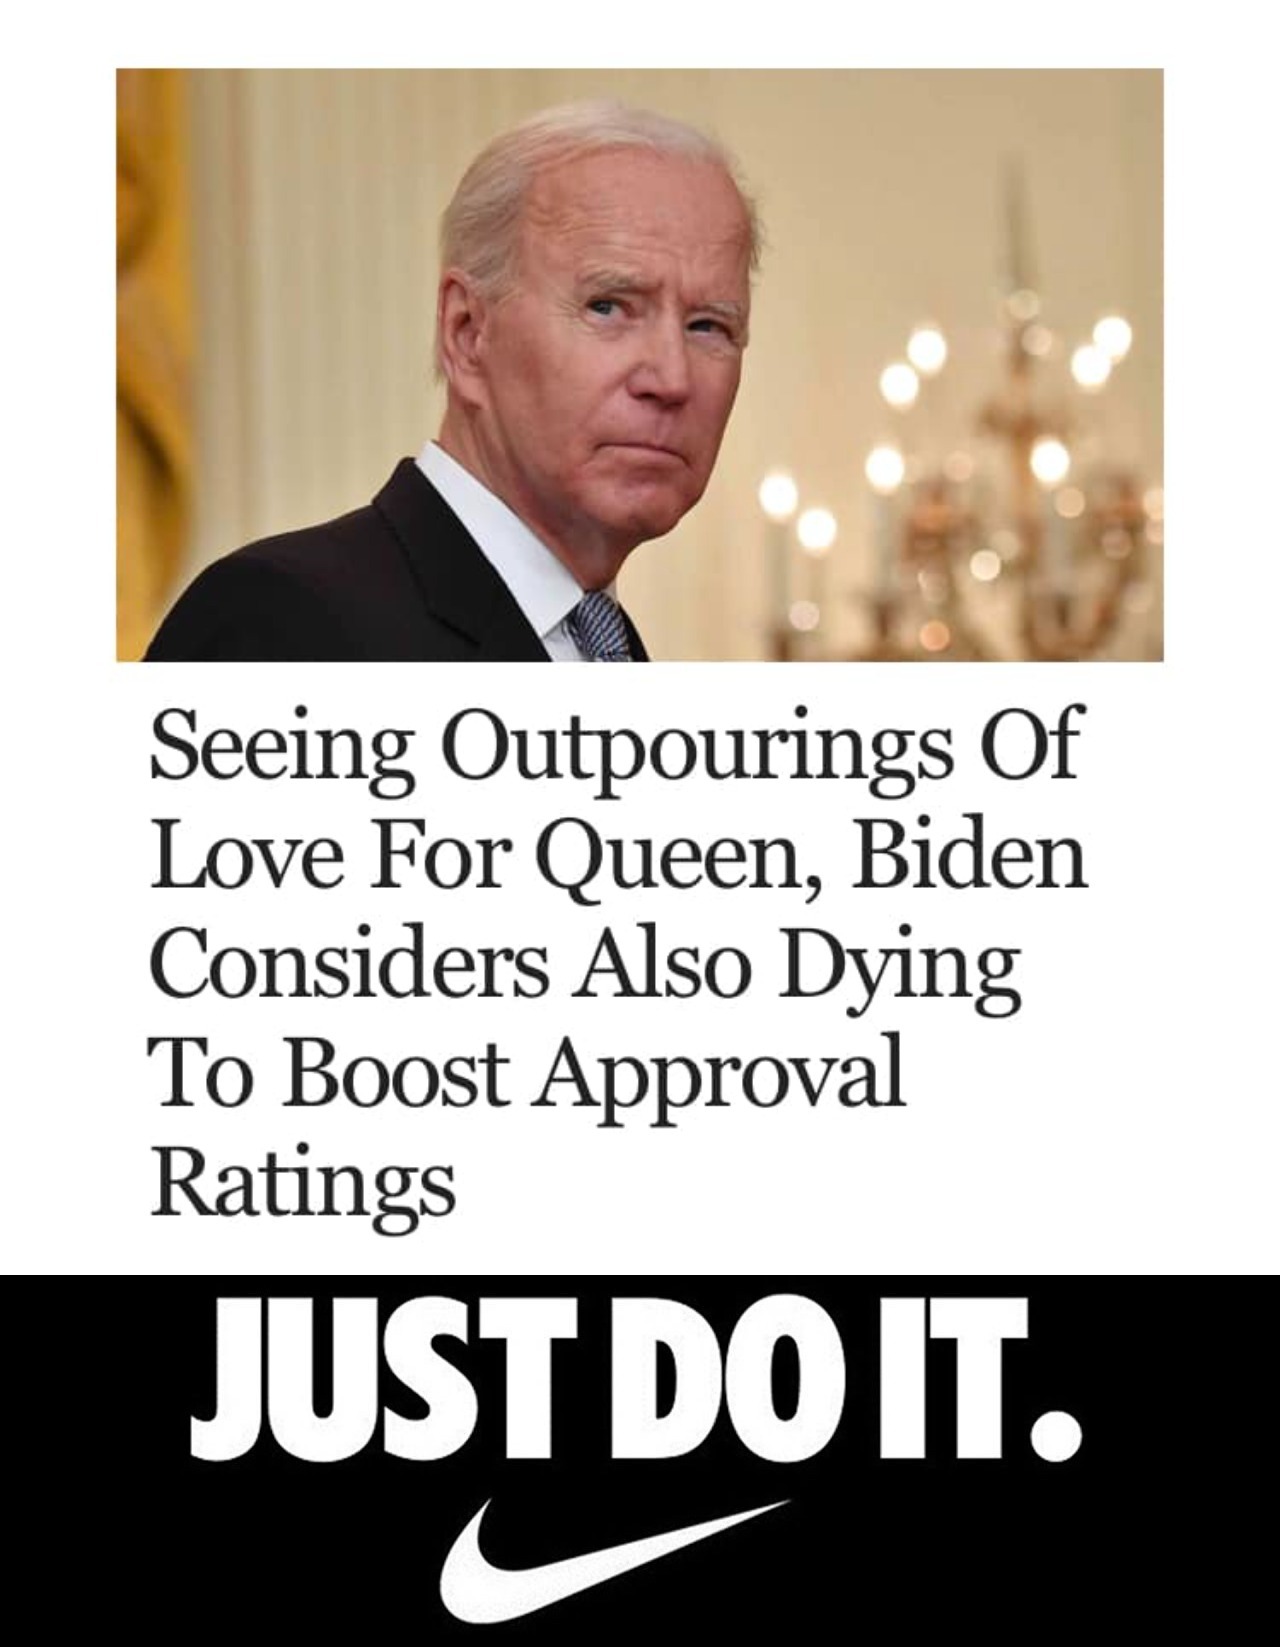 Contemplating Suicide Guy | image tagged in contemplating suicide guy,just do it,dementia joe,sad joe biden,creepy joe biden,creepy uncle joe | made w/ Imgflip meme maker